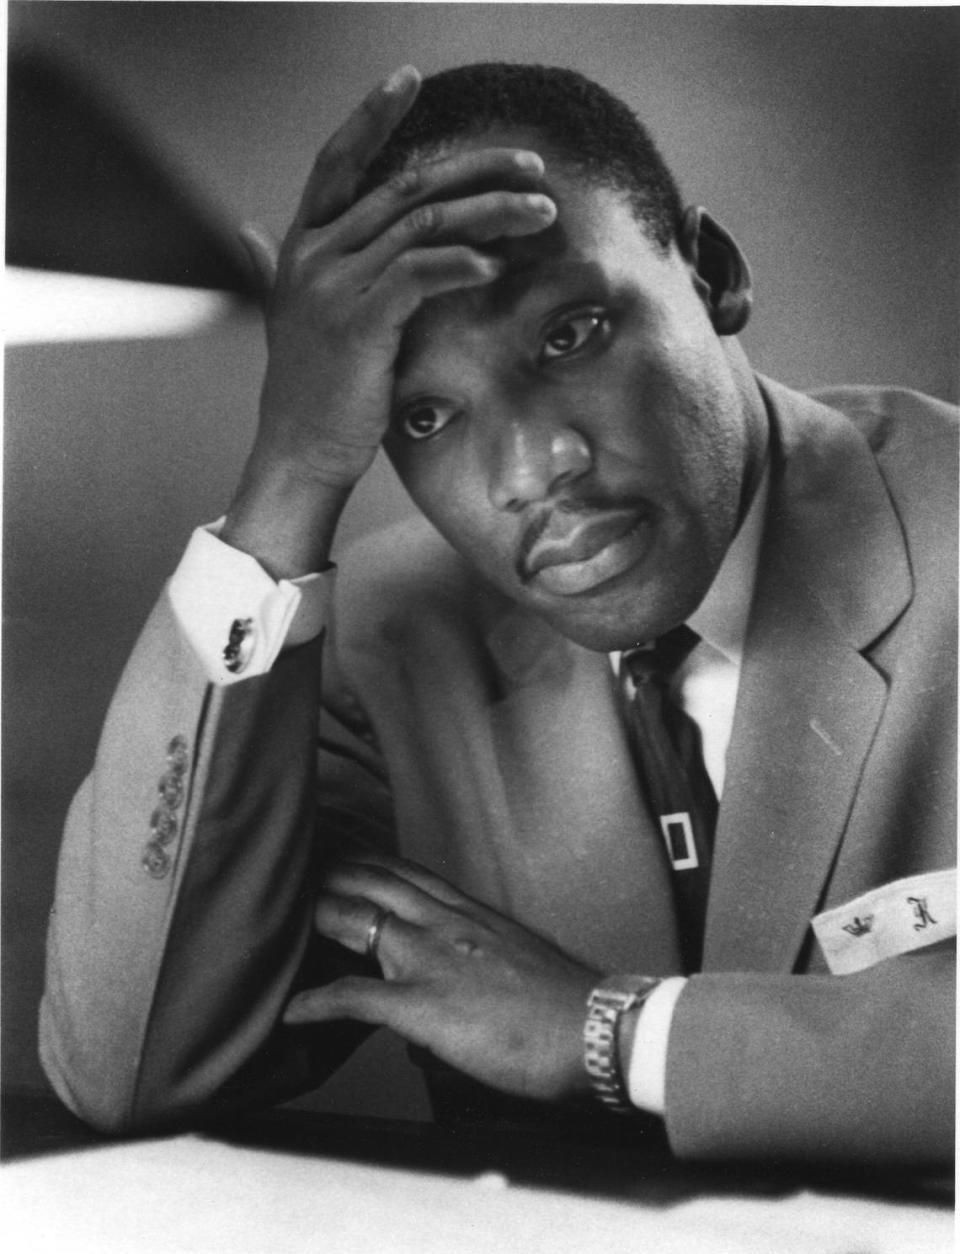 Martin Luther King Jr., in Montgomery, Alabama, in 1956. MLK biographer Jonathan Eig is coming to Charlotte’s Knight Theater July 21 for a discussion and book signing.